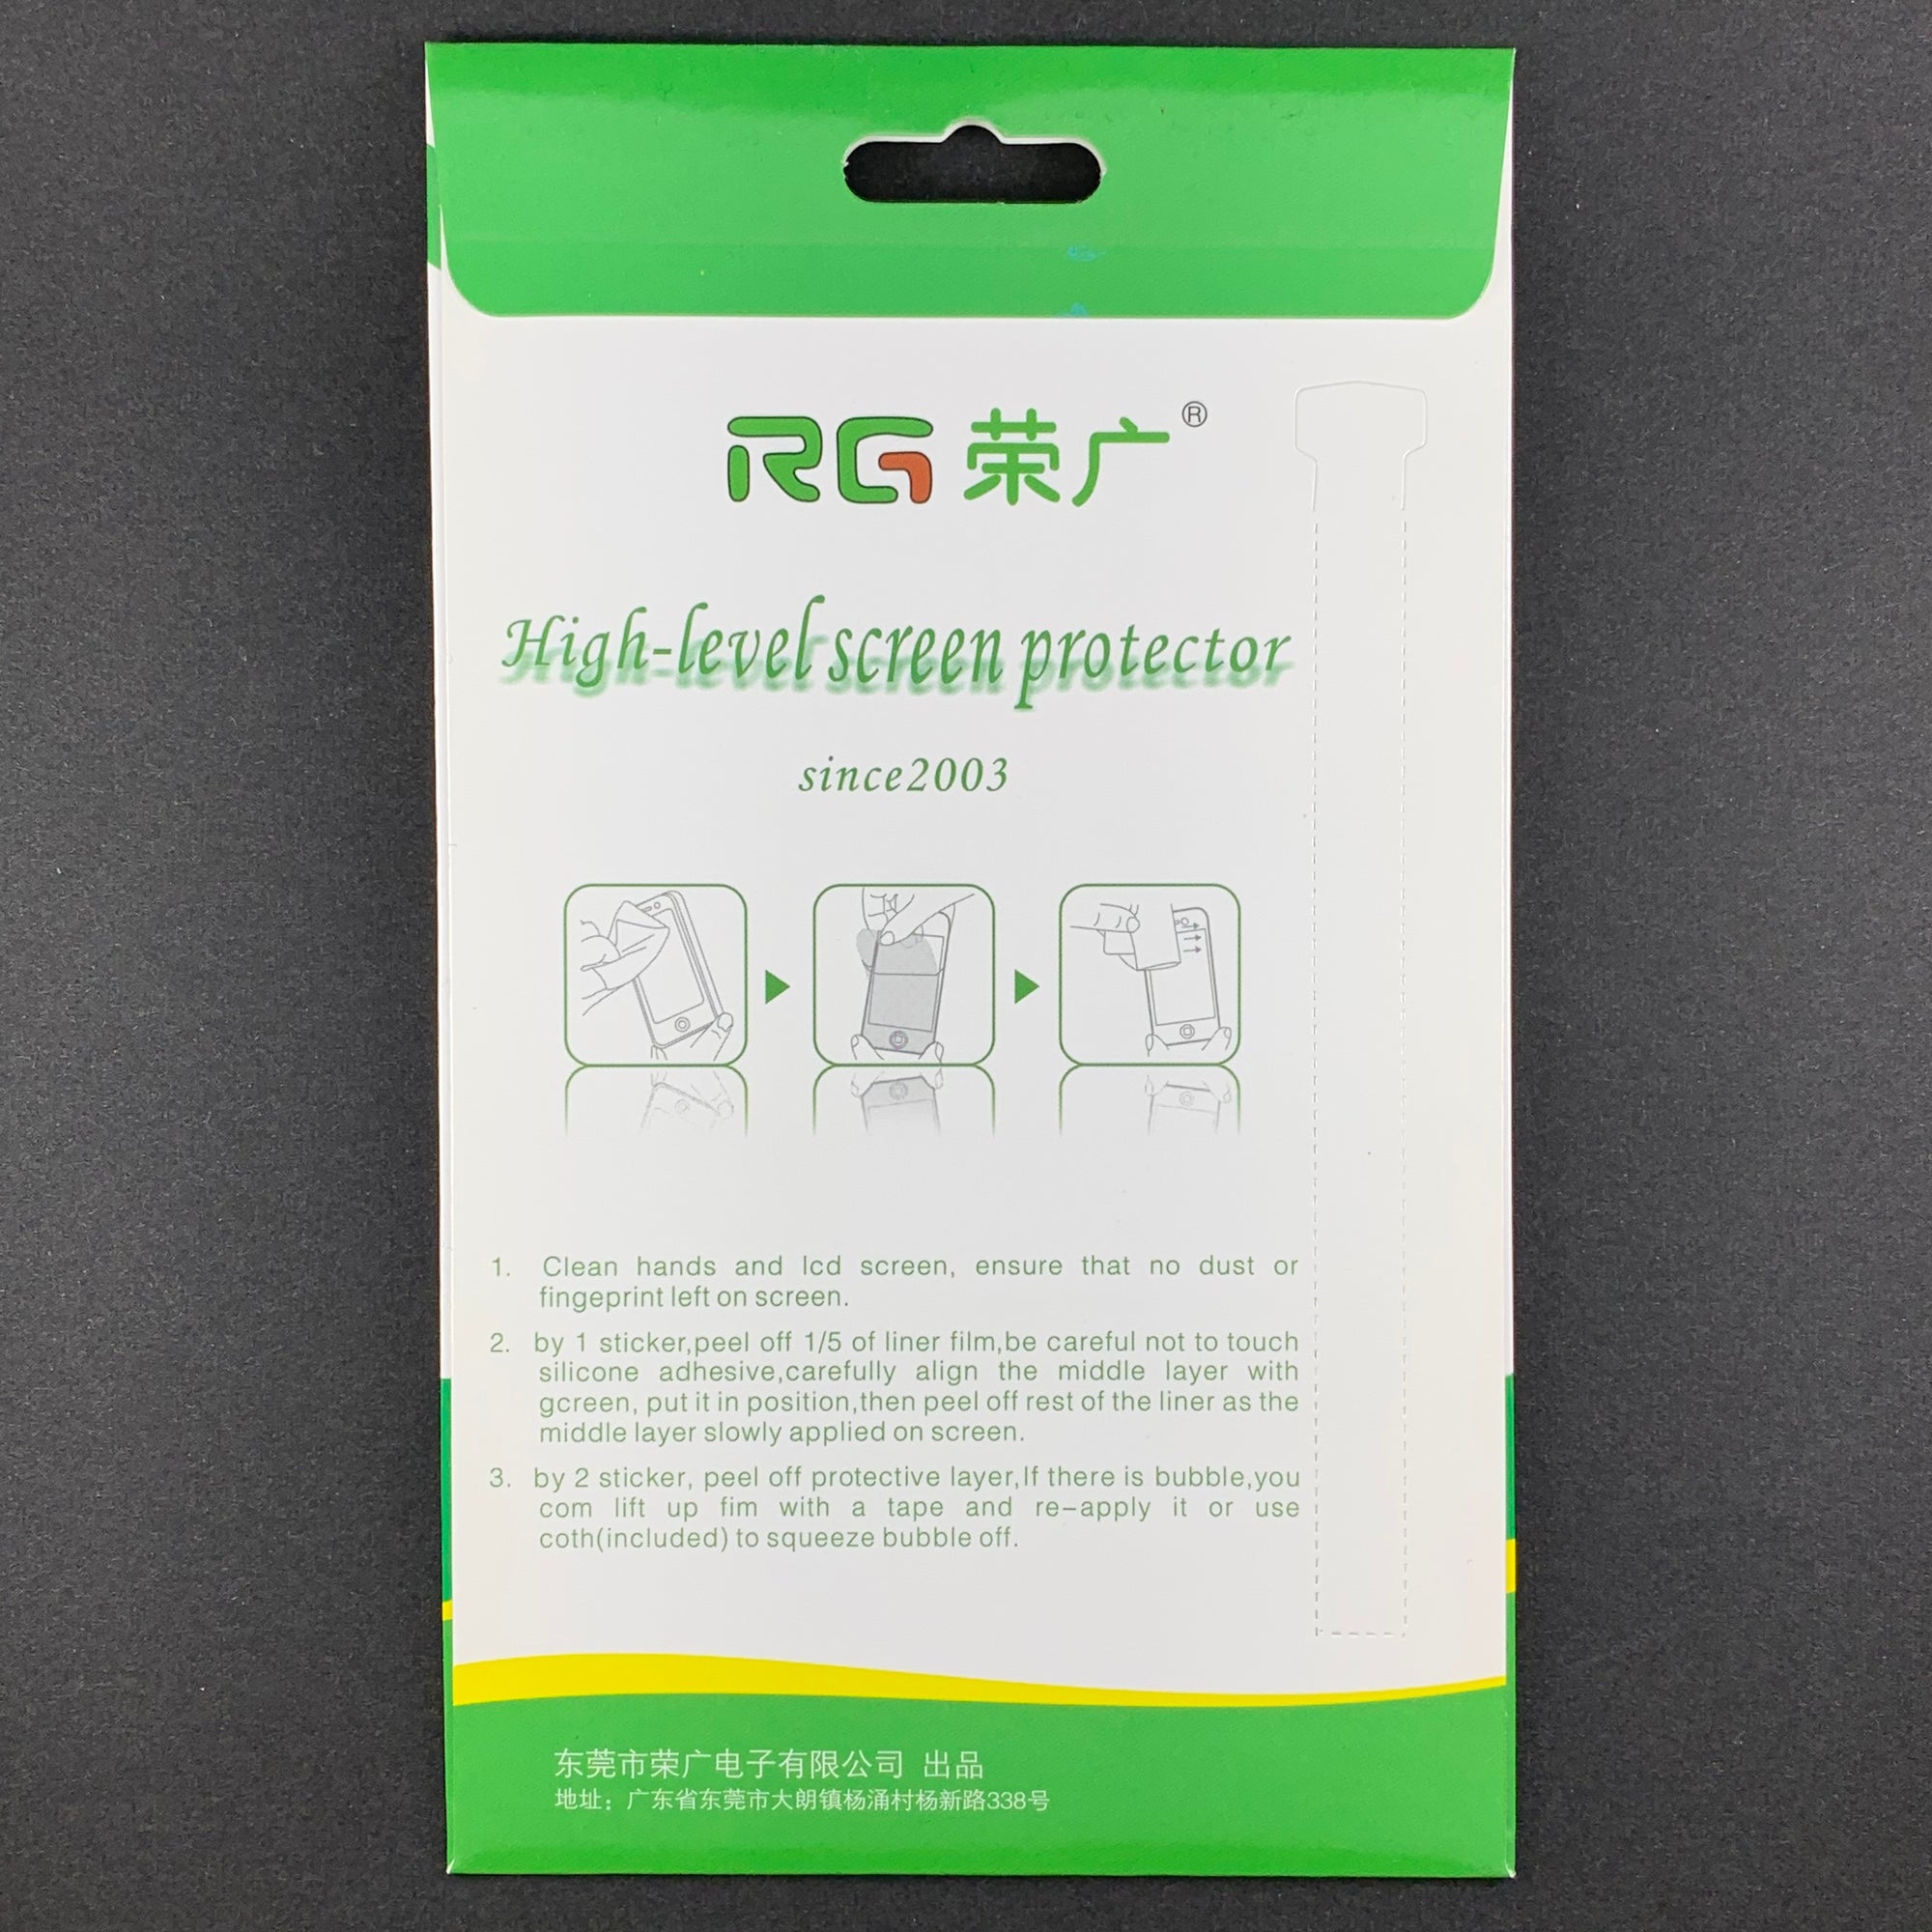 RG Professional Soft Film Screen Protector for iPad Pro 12.9" 3rd / 4th Gen (MATTE, 2-PACK)